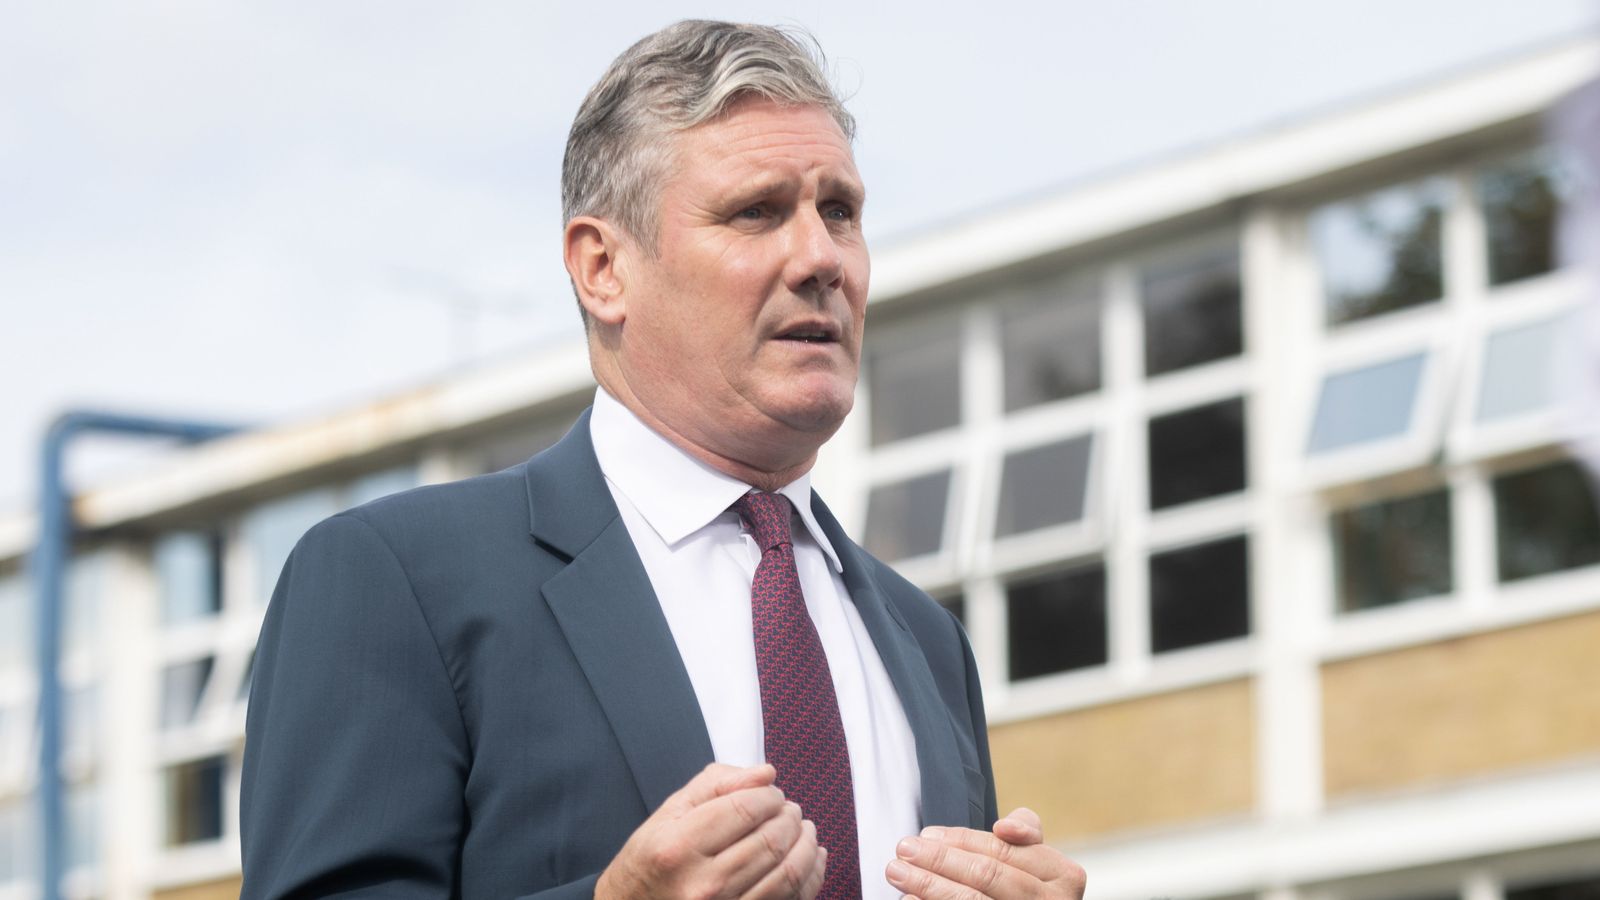 Andrew Malkinson: Sir Keir Starmer urged to co-operate with potential public inquiry into 'appalling' miscarriage of justice